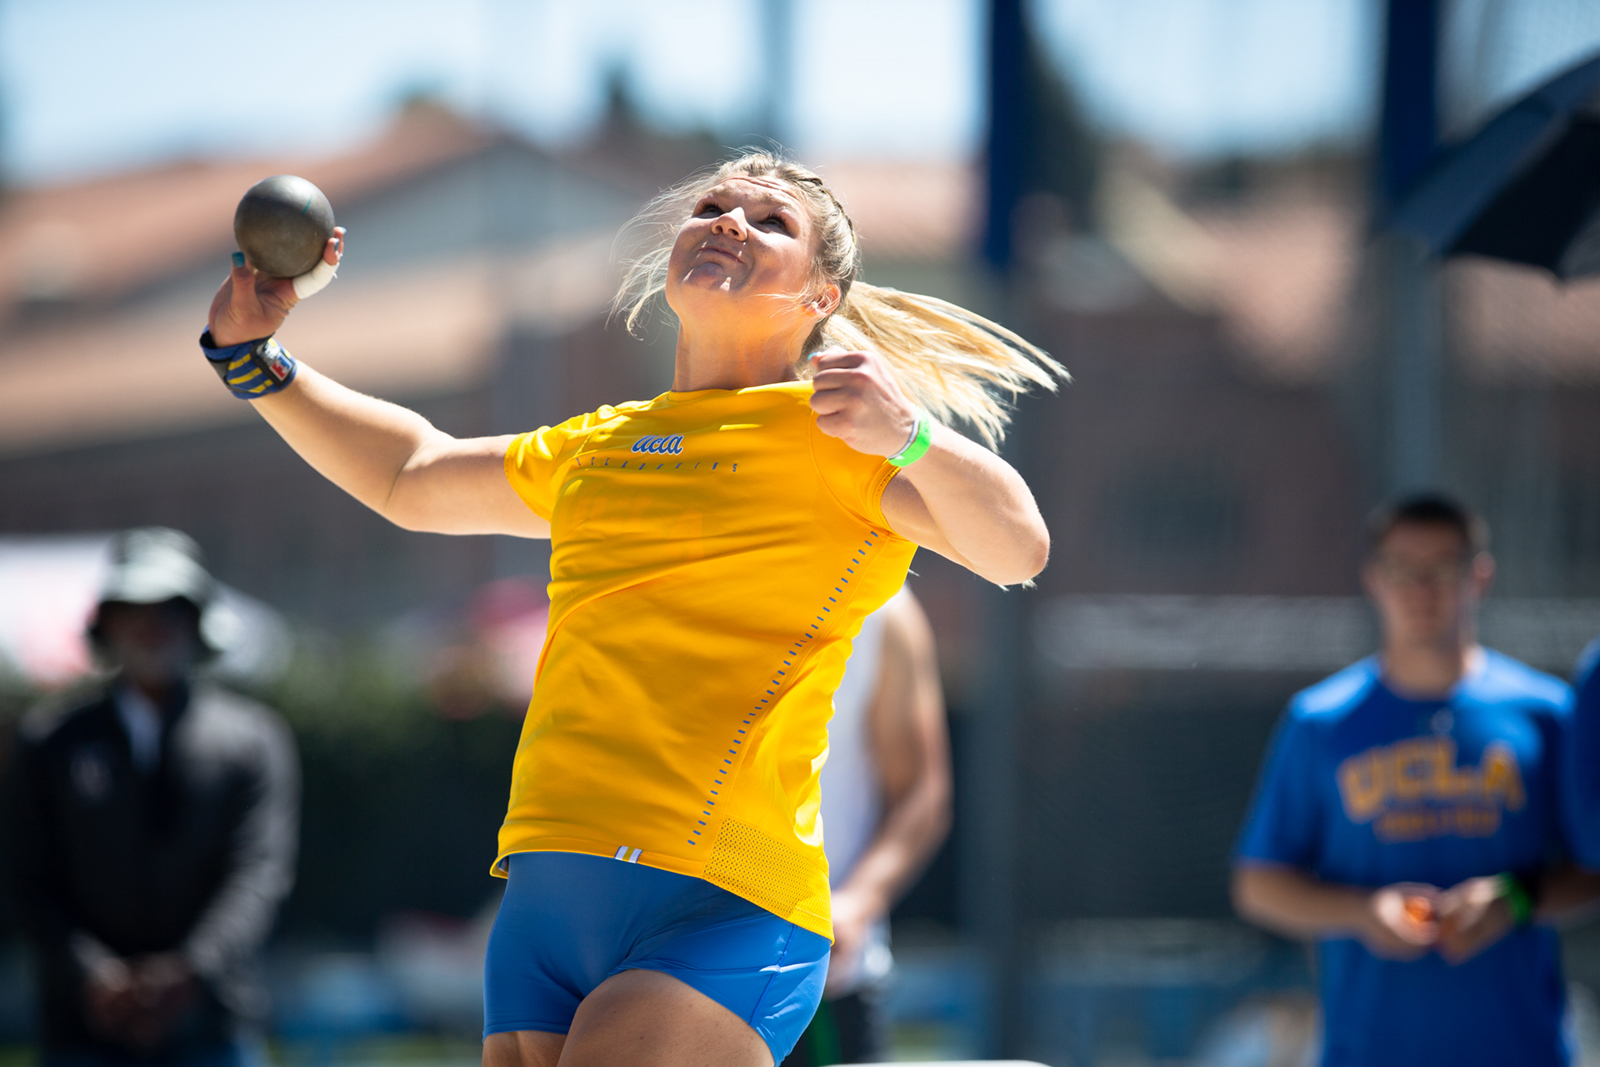 Track and field prospers at NCAA west regional with 20 qualifying